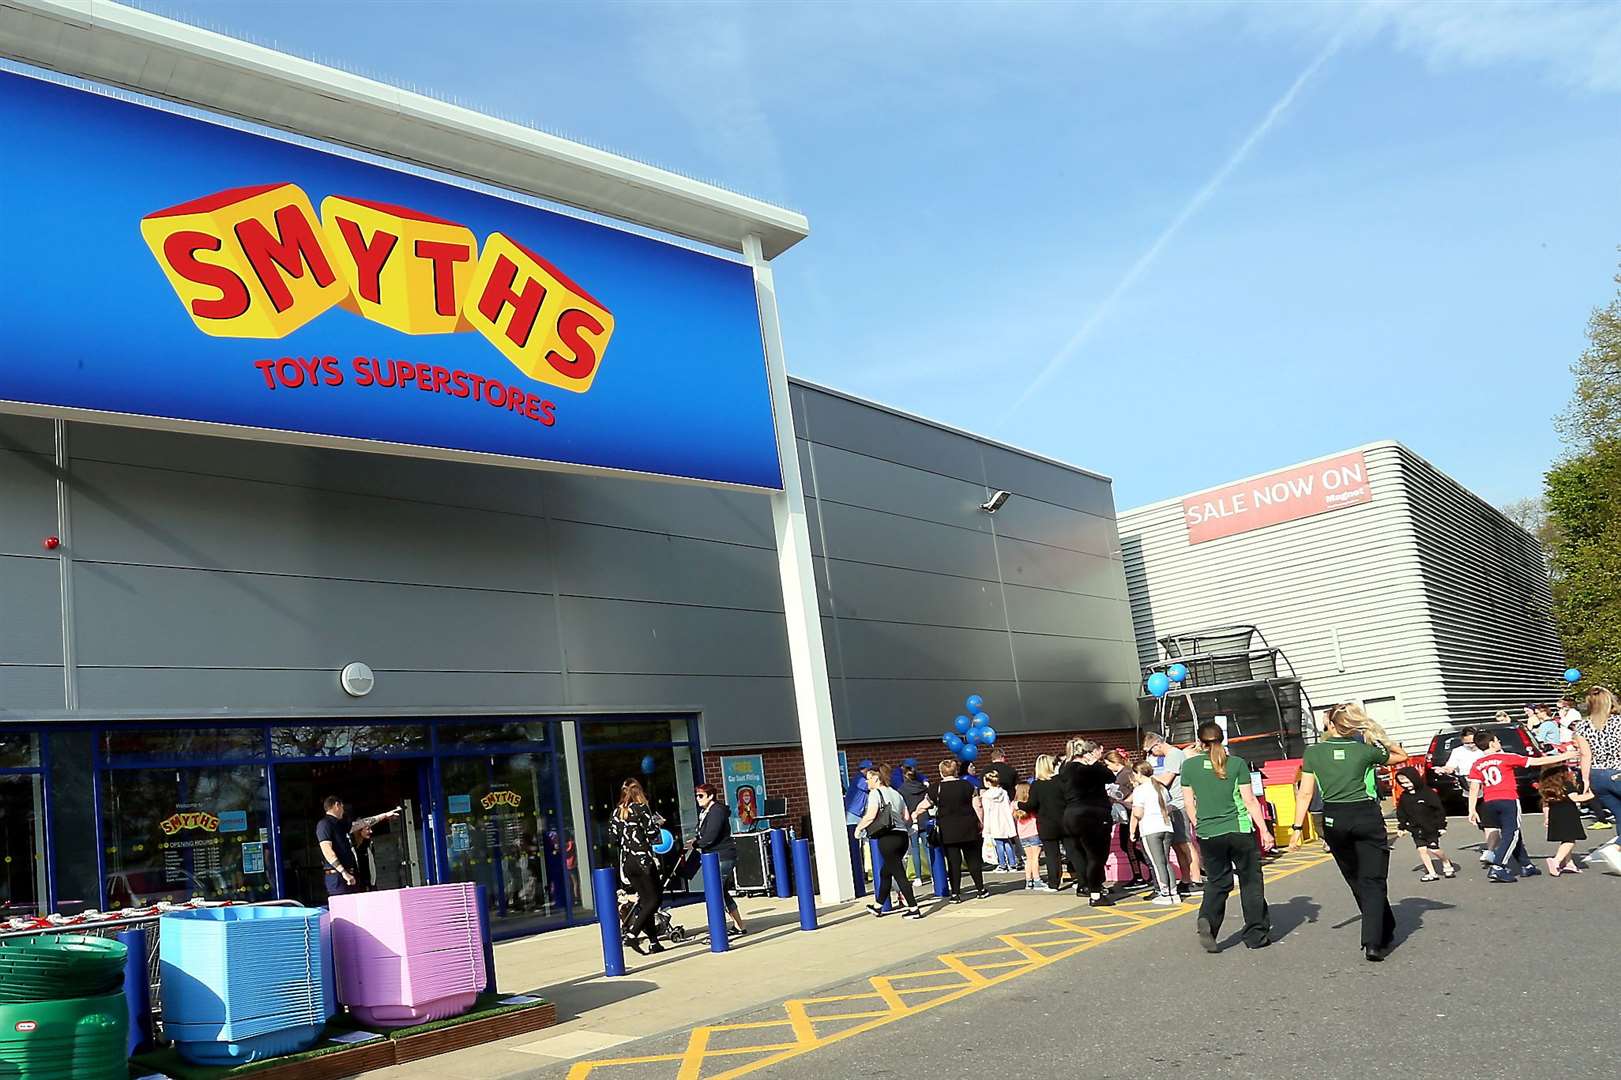 Smyths Toys, which has already released its winter gift guide, says it hopes it gives shoppers time to purchase in good time